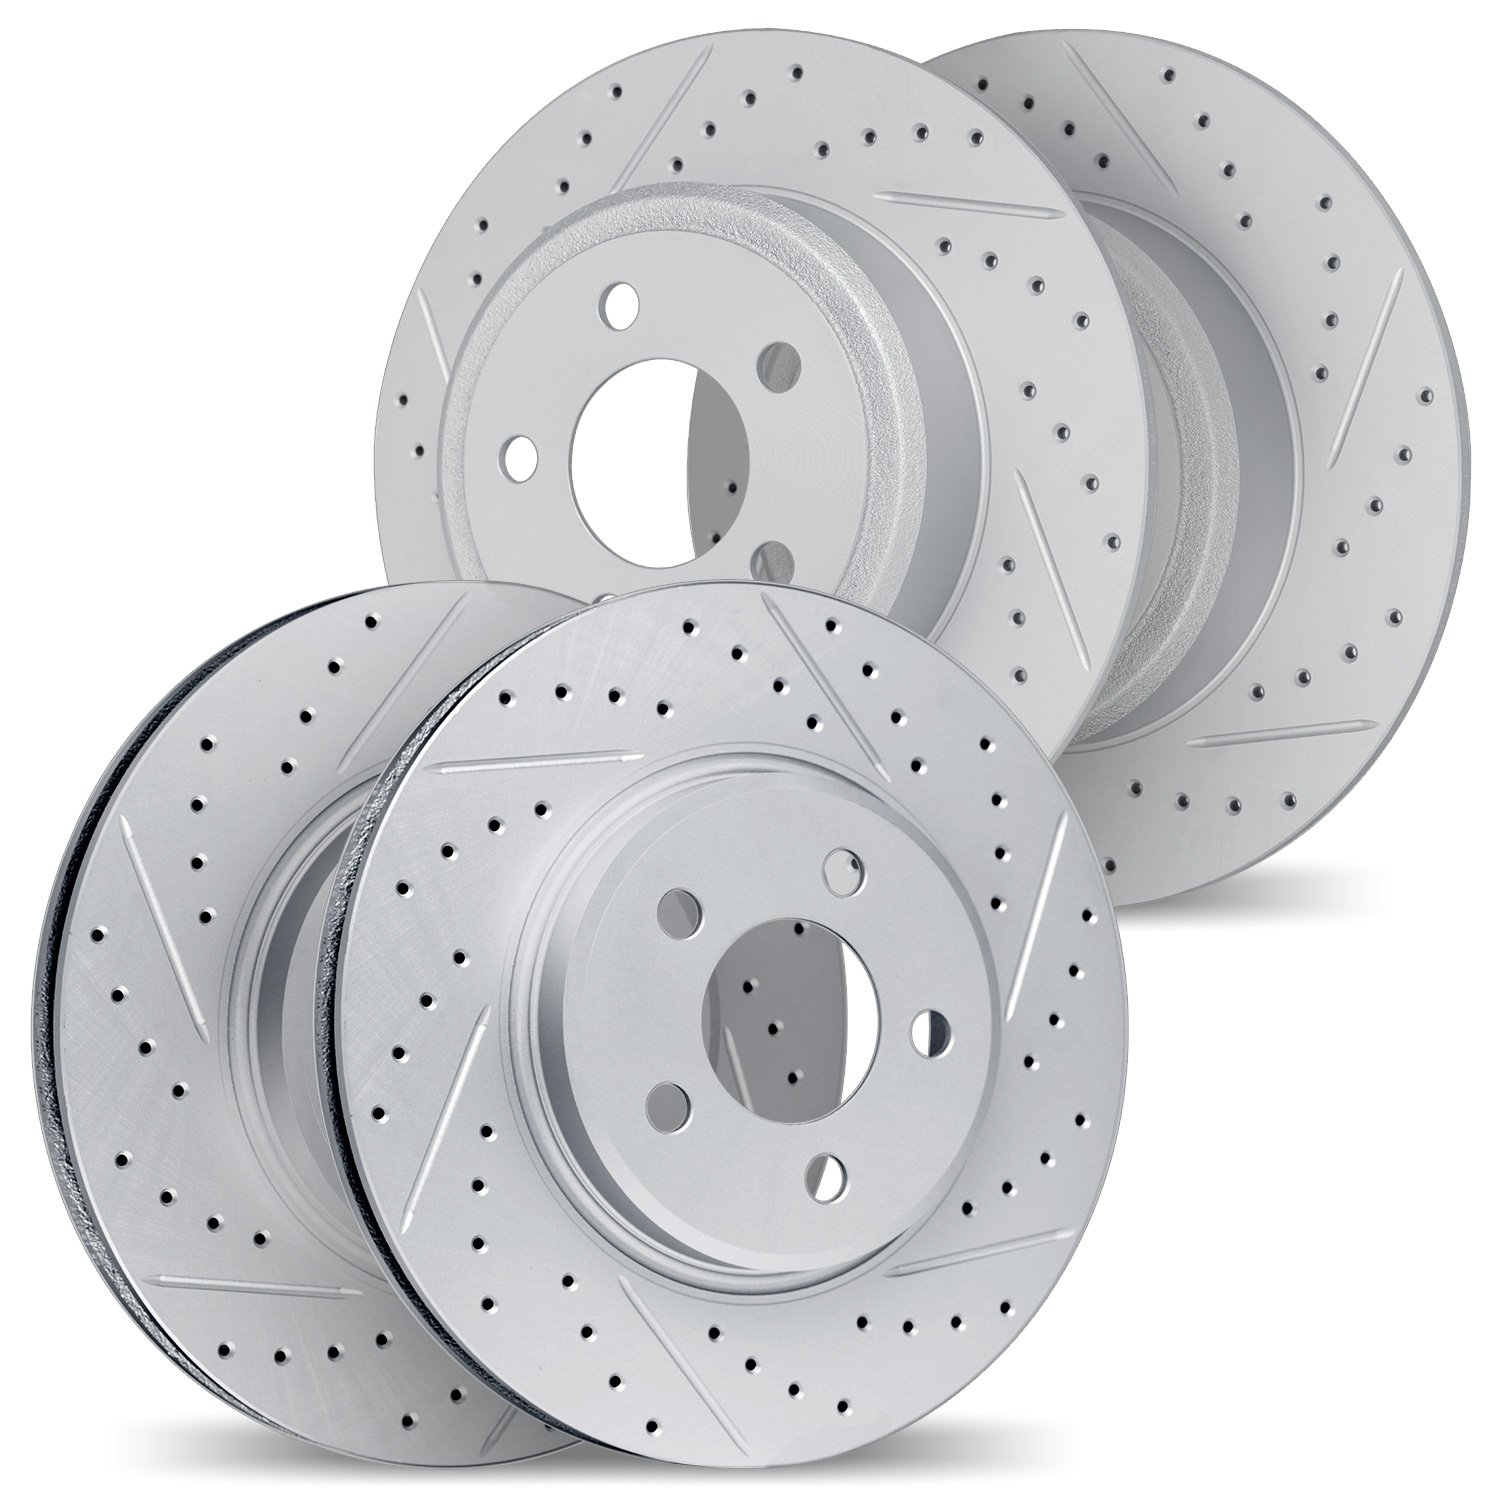 2004-32010 Geoperformance Drilled/Slotted Brake Rotors, Fits Select Mini, Position: Front and Rear